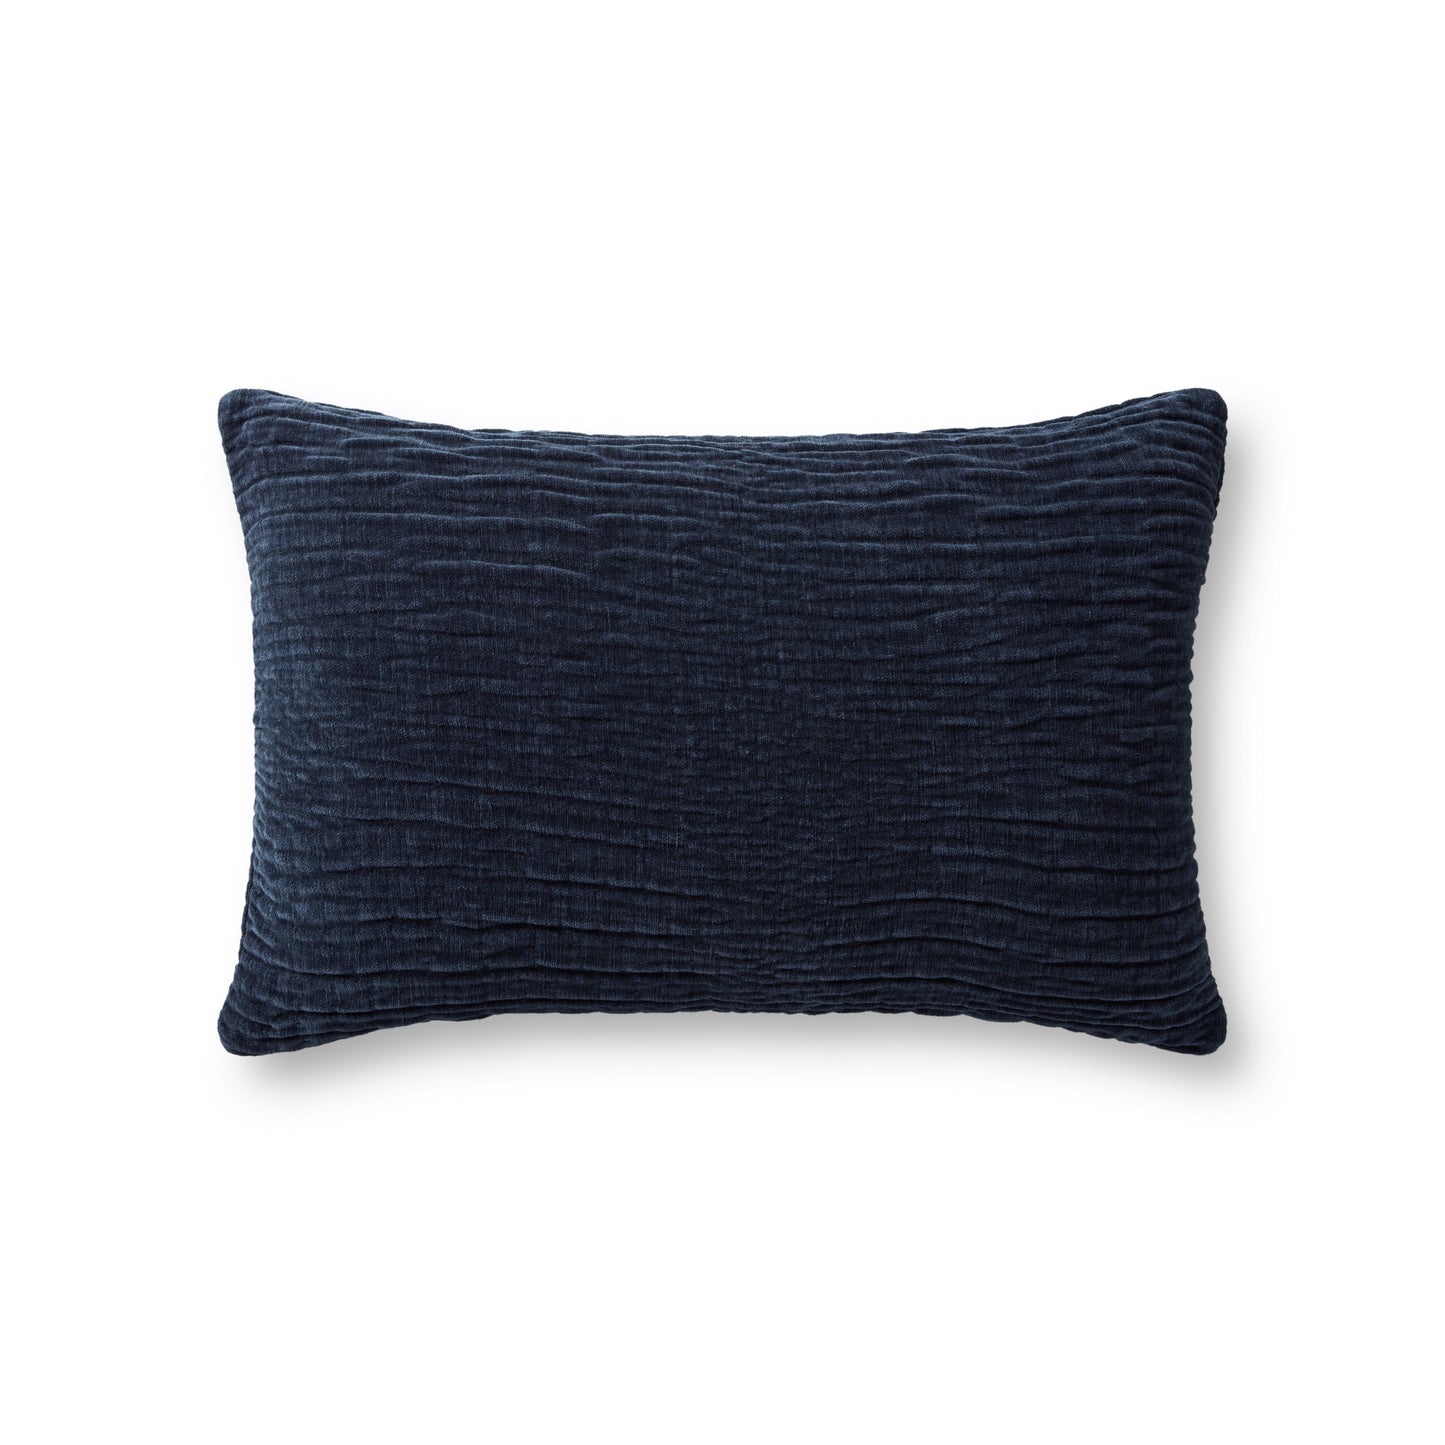 Photo of a pillow;  Navy 13'' x 21'' Cover w/Poly Pillow